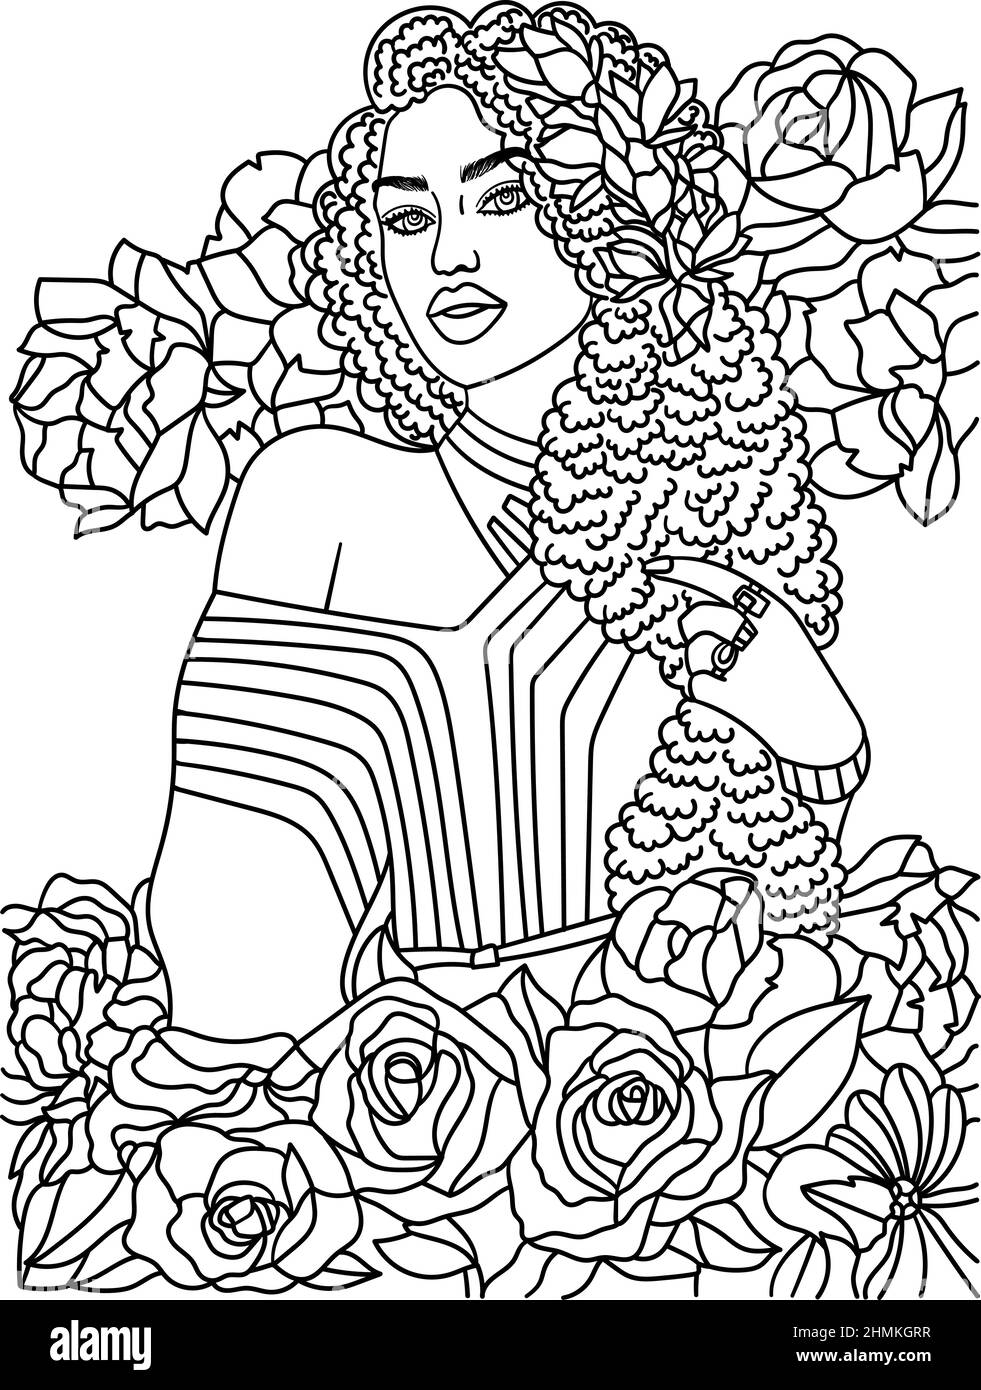 African American Flower Girl Adult Coloring Page  Stock Vector